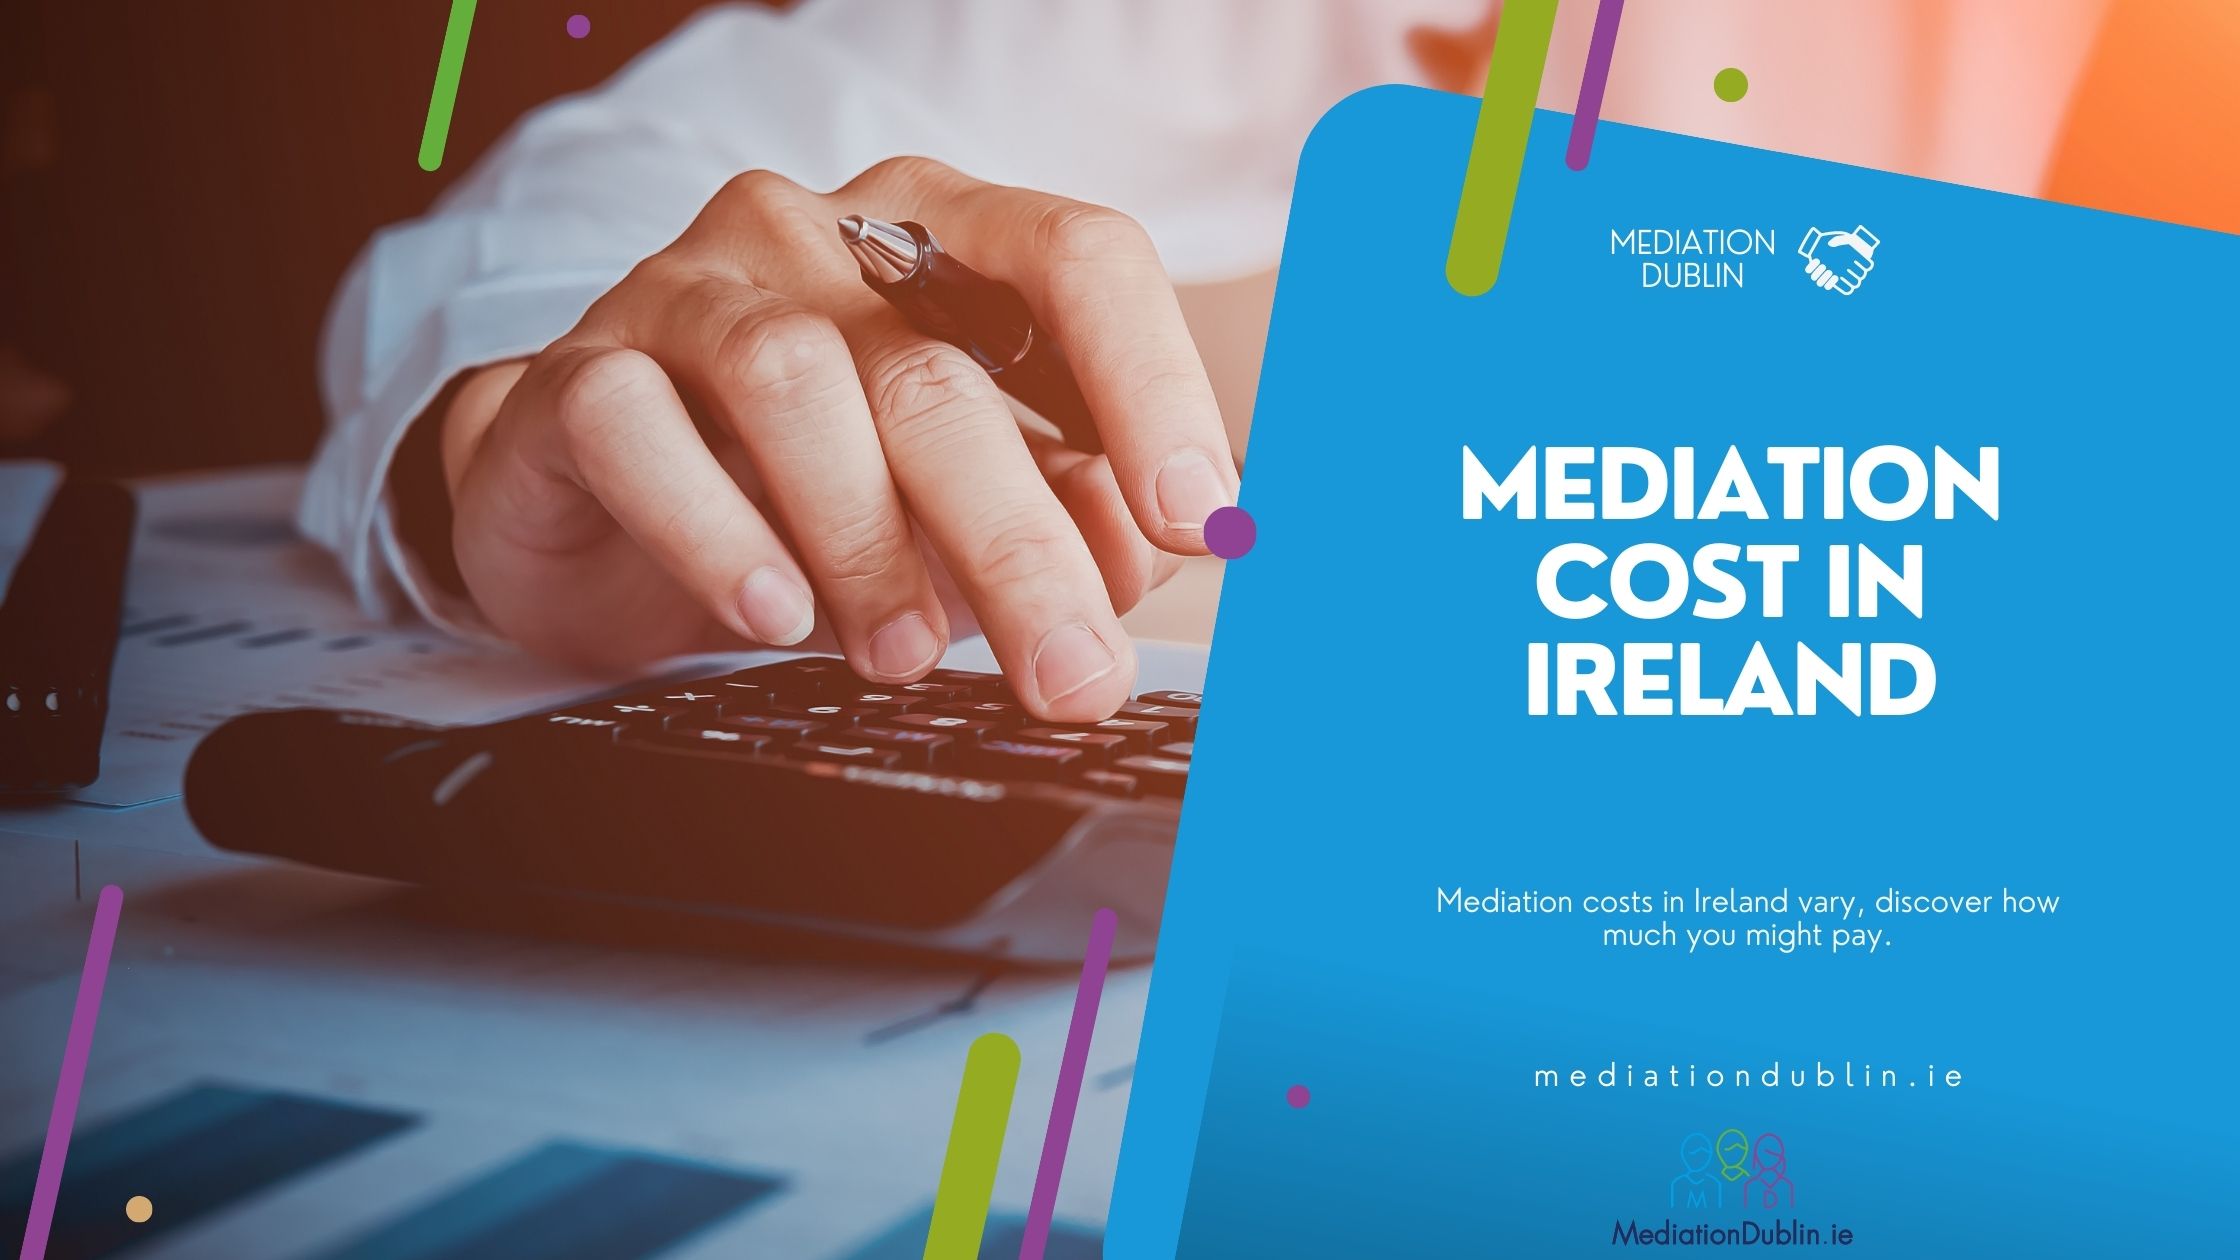 How Much Does Mediation Cost In Ireland